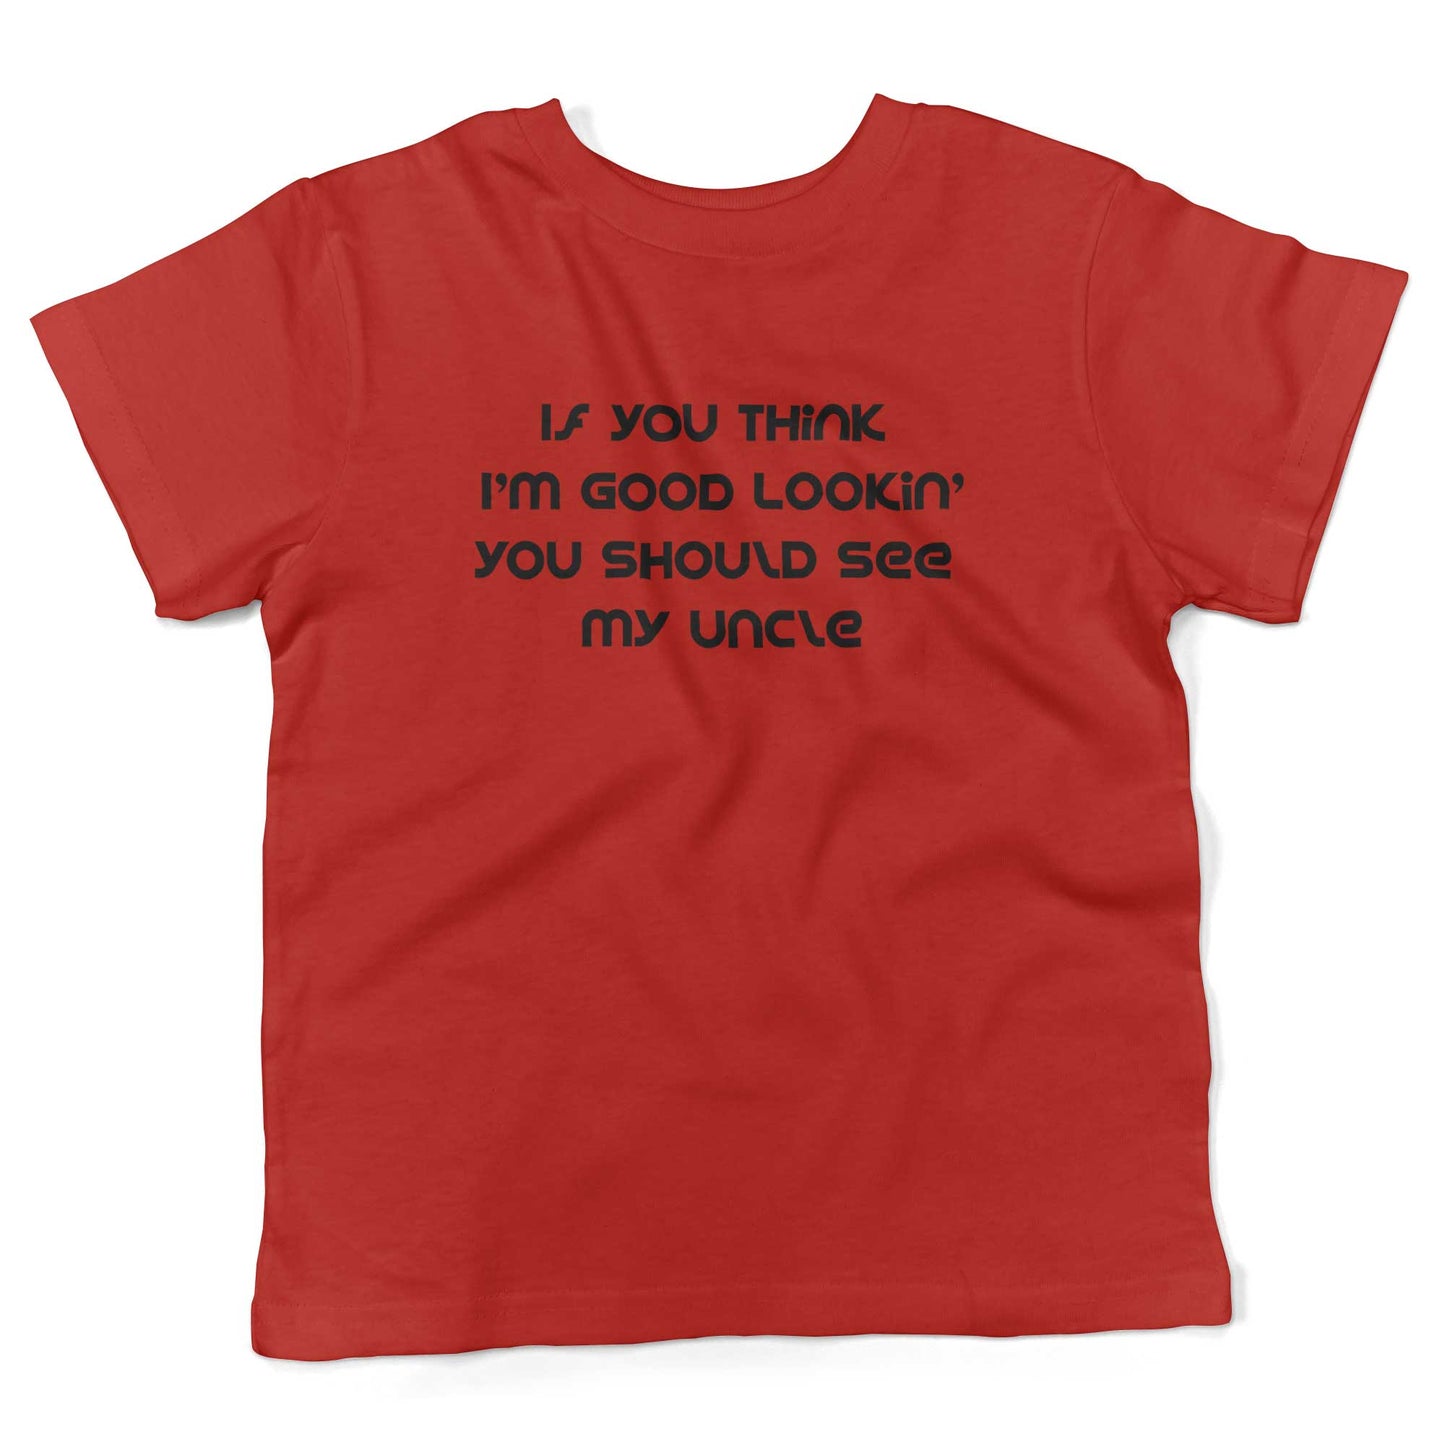 If You Think I'm Good Lookin' You Should See My Uncle Toddler Shirt-Red-2T